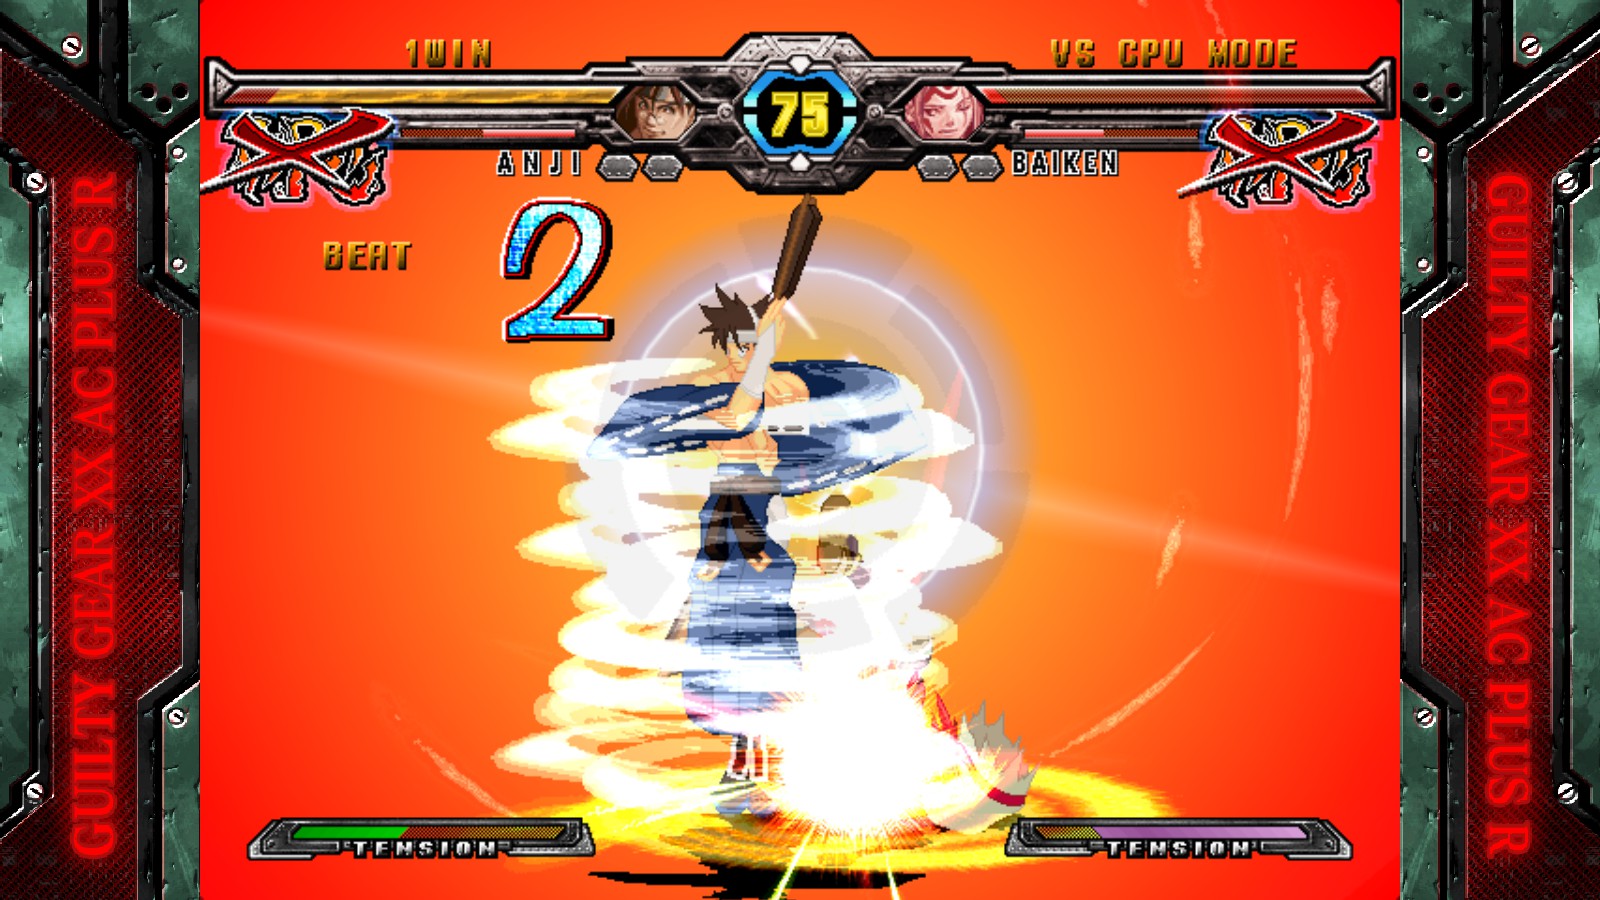 Guilty gear accent core plus r steam фото 24